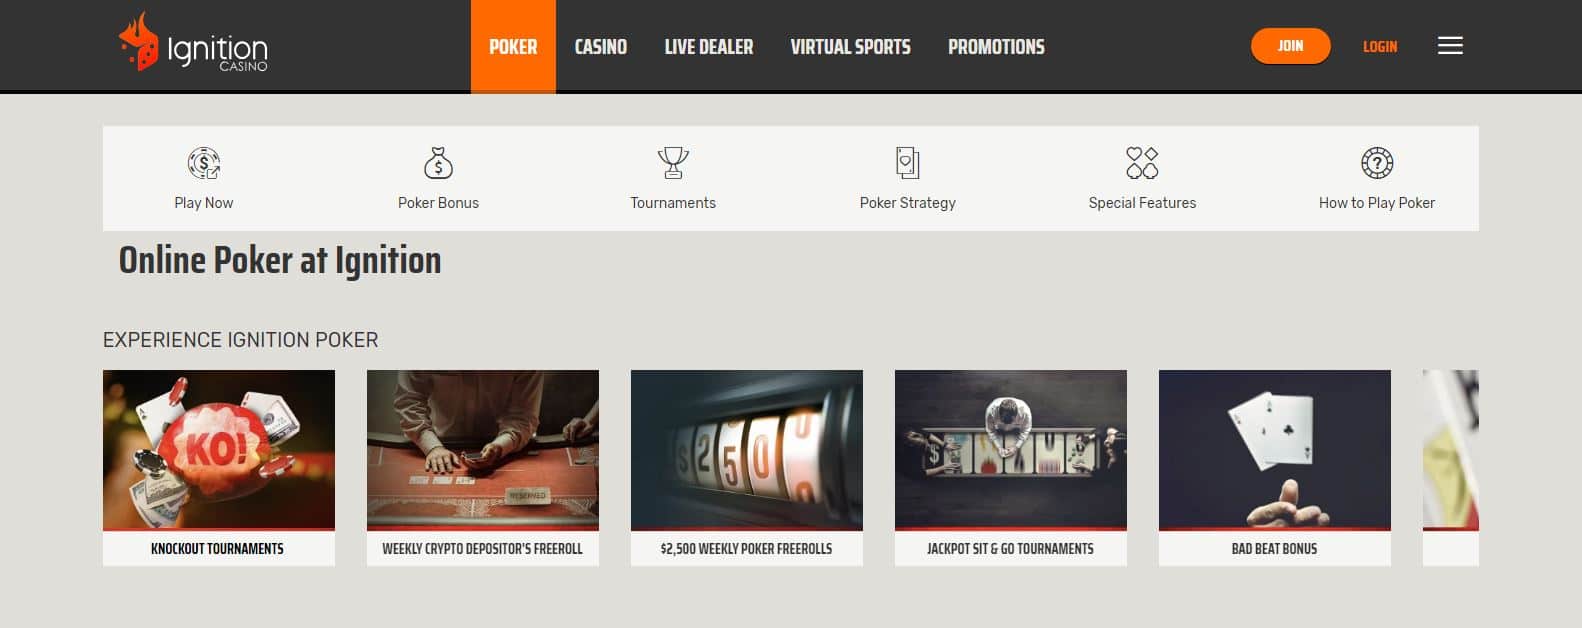 Ignition poker games section